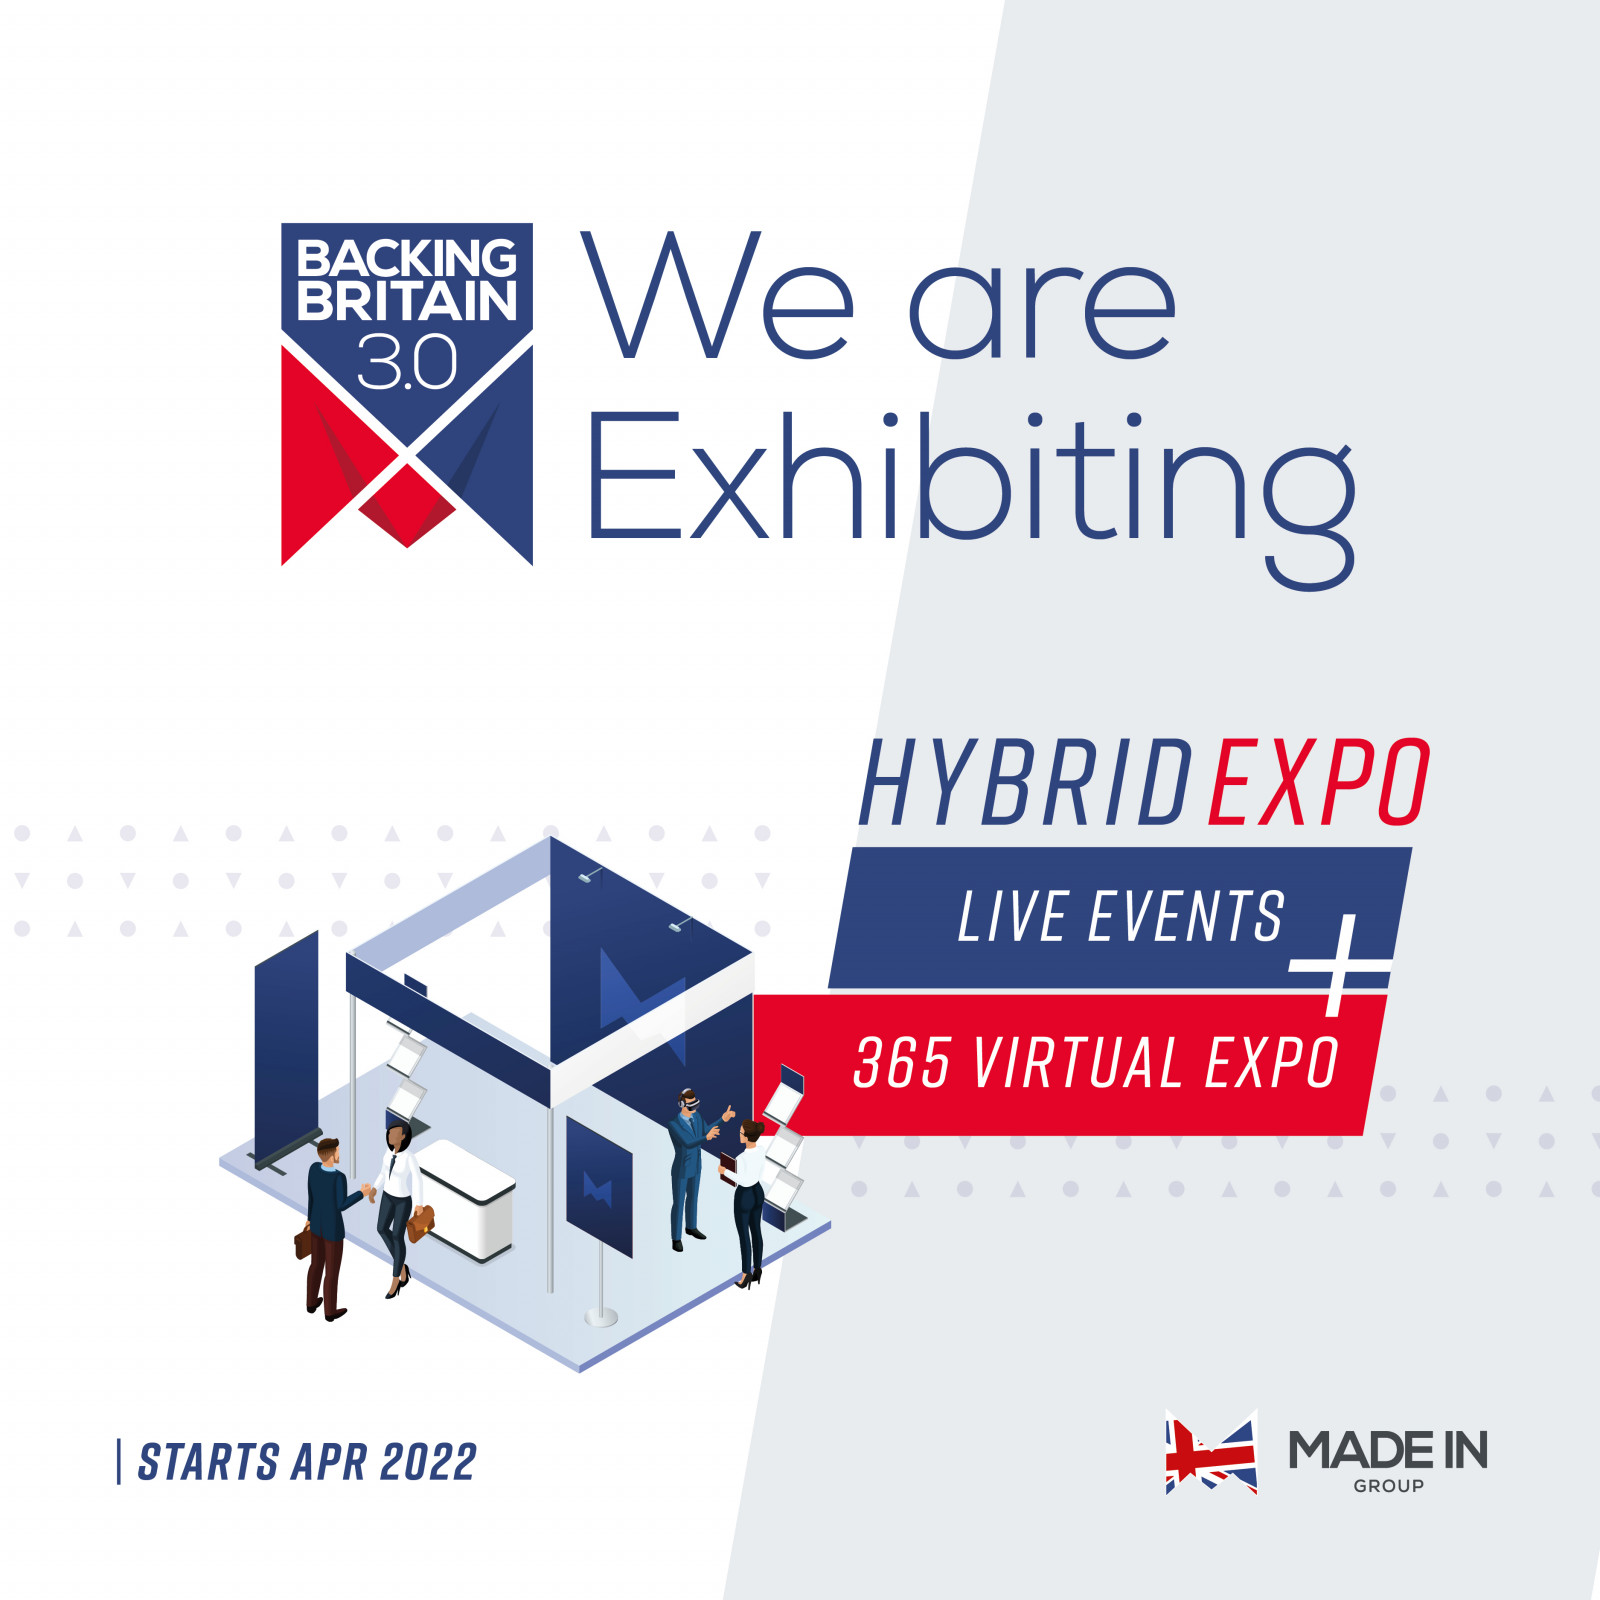 Professional Polishing Services Ltd is Exhibiting at Innovative Hybrid Exhibition: Backing Britain 3.0